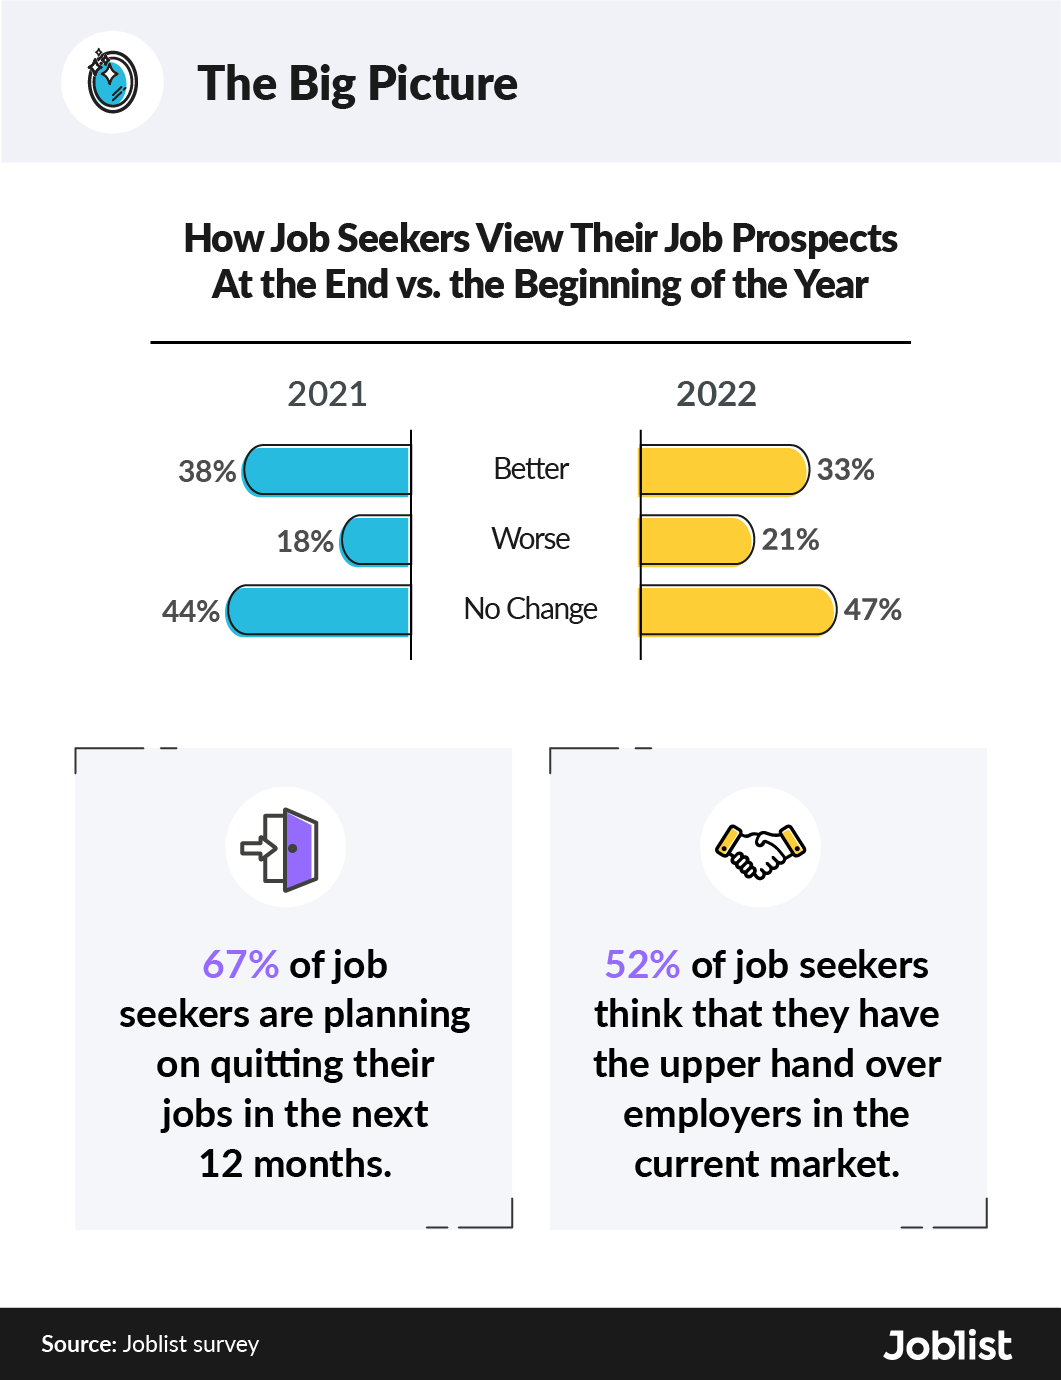 Infographic about how job seekers view their job prospects at the end vs. beginning of 2021 and 2022.